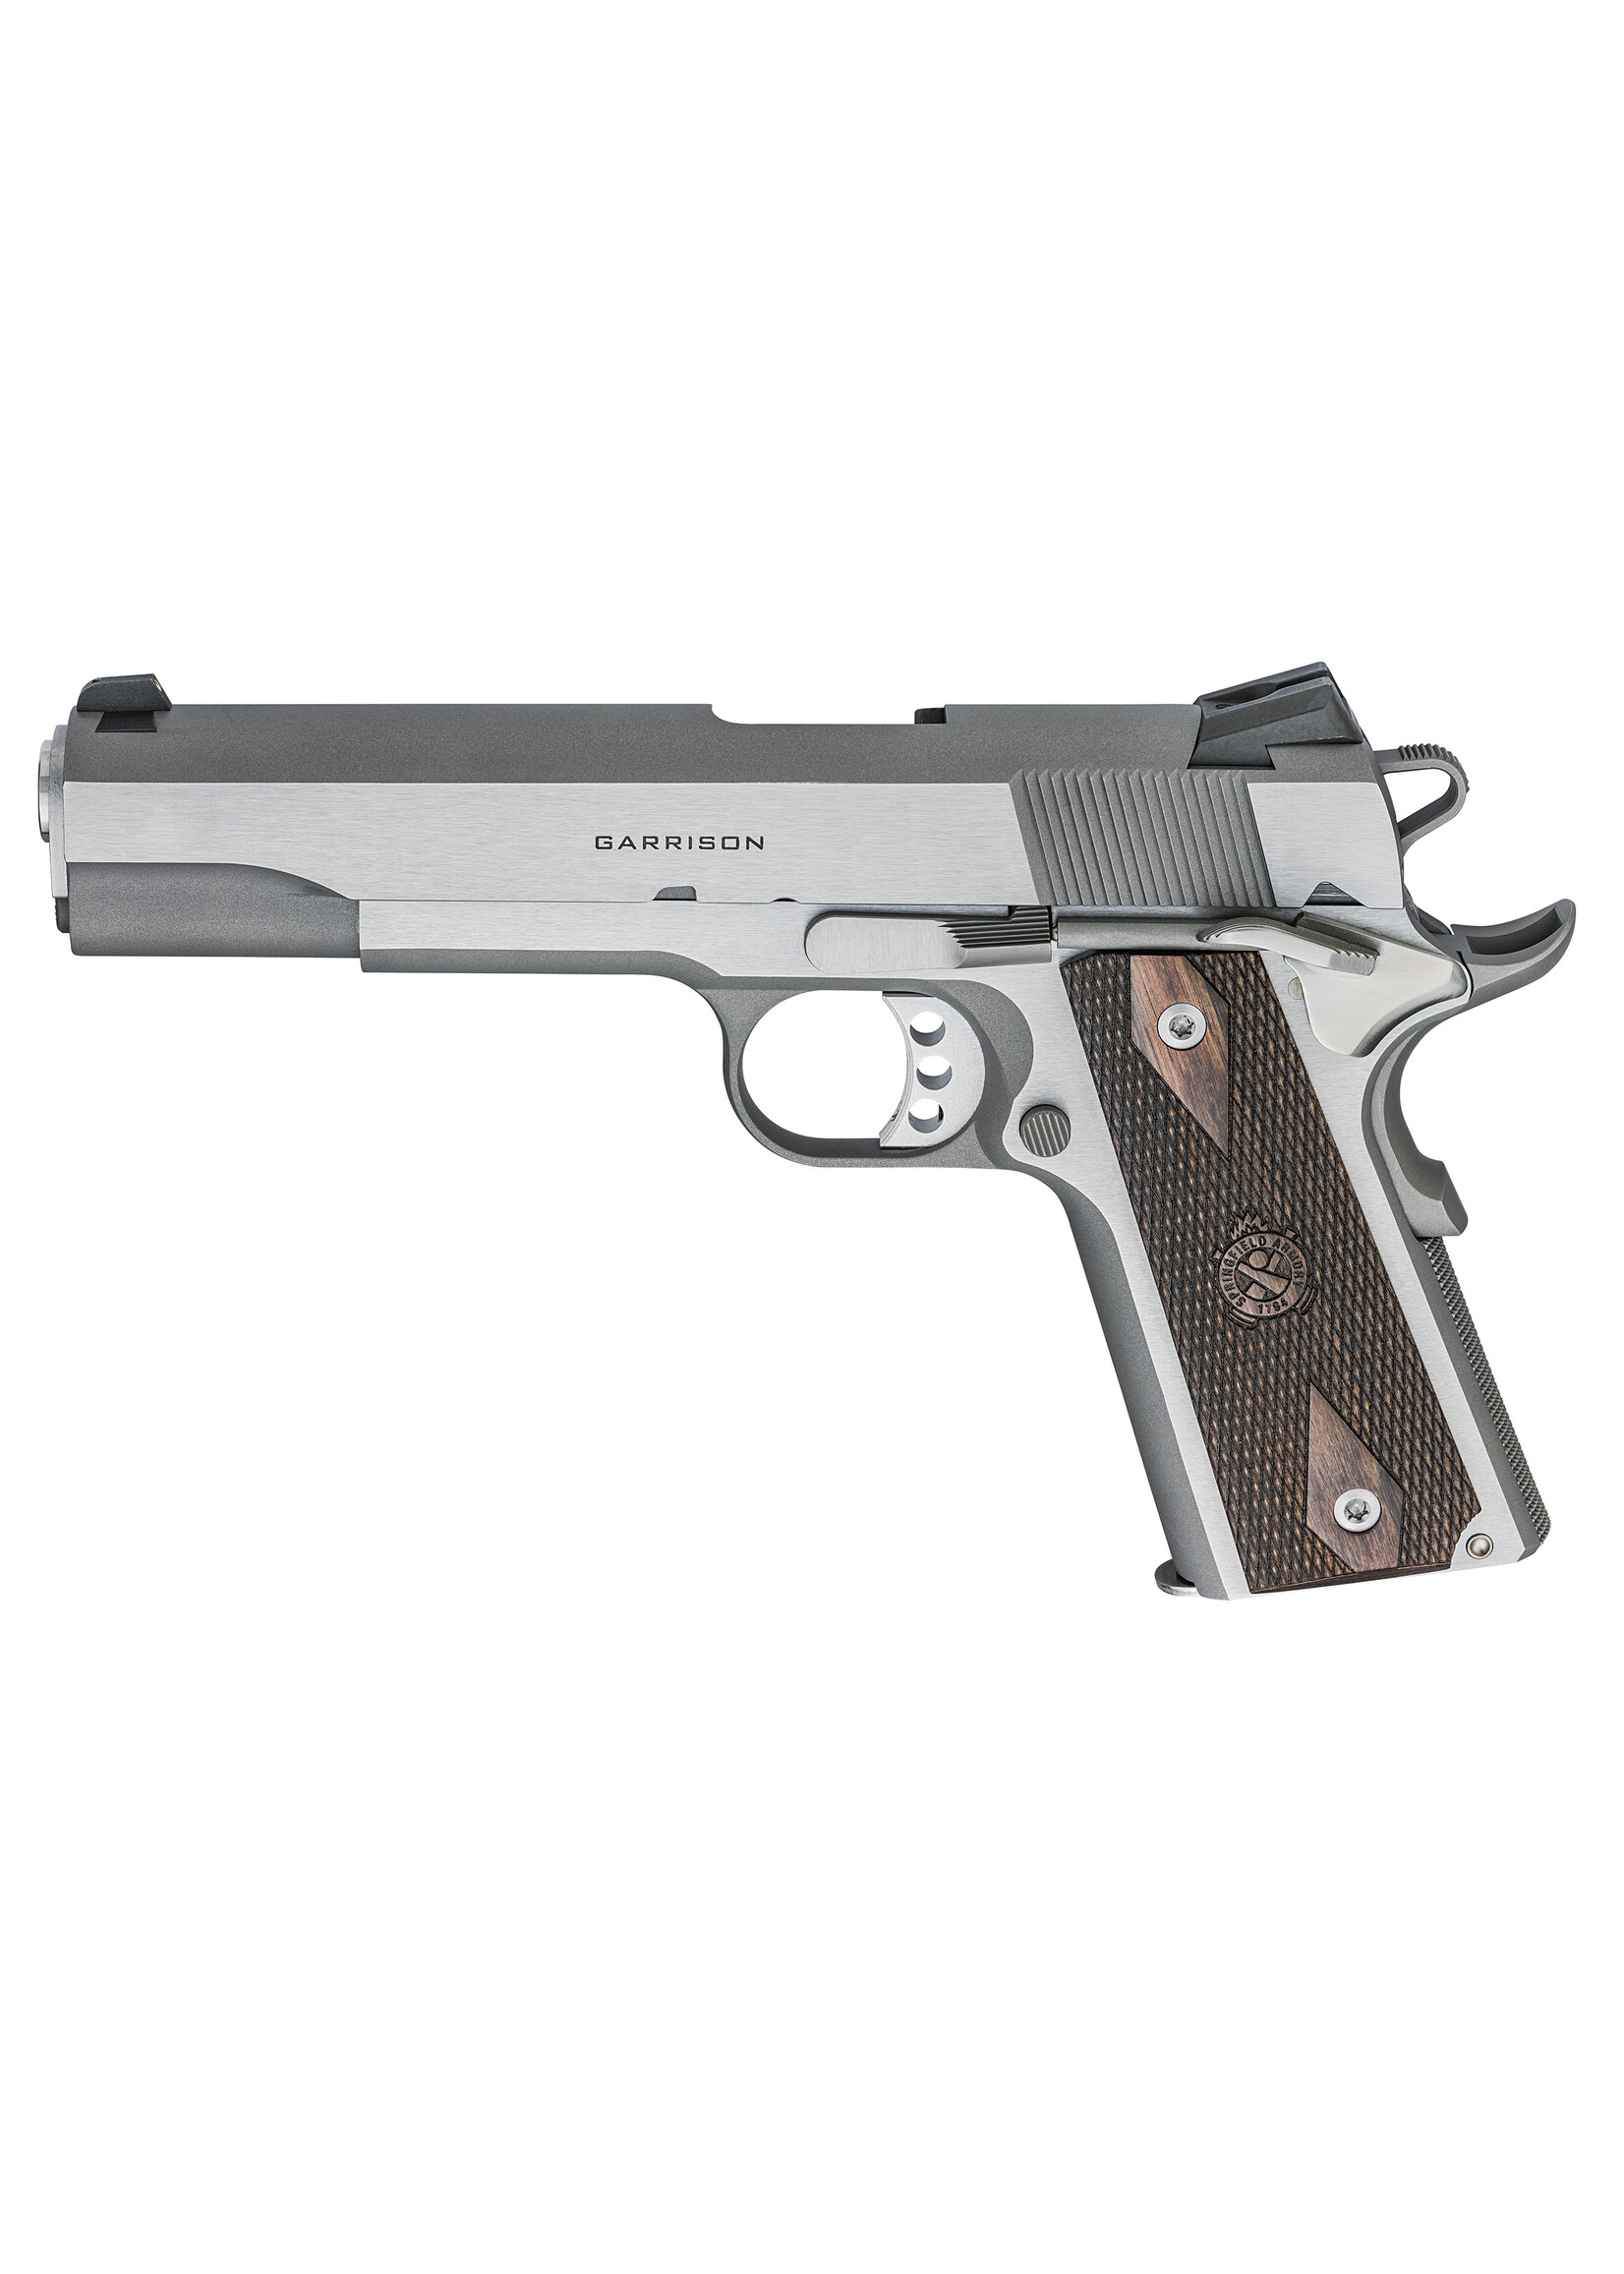 SPRINGFIELD ARMORY SPRINGFIELD ARMORY GARRISON 1911 | STAINLESS STEEL .45ACP 8RD 5" BBL